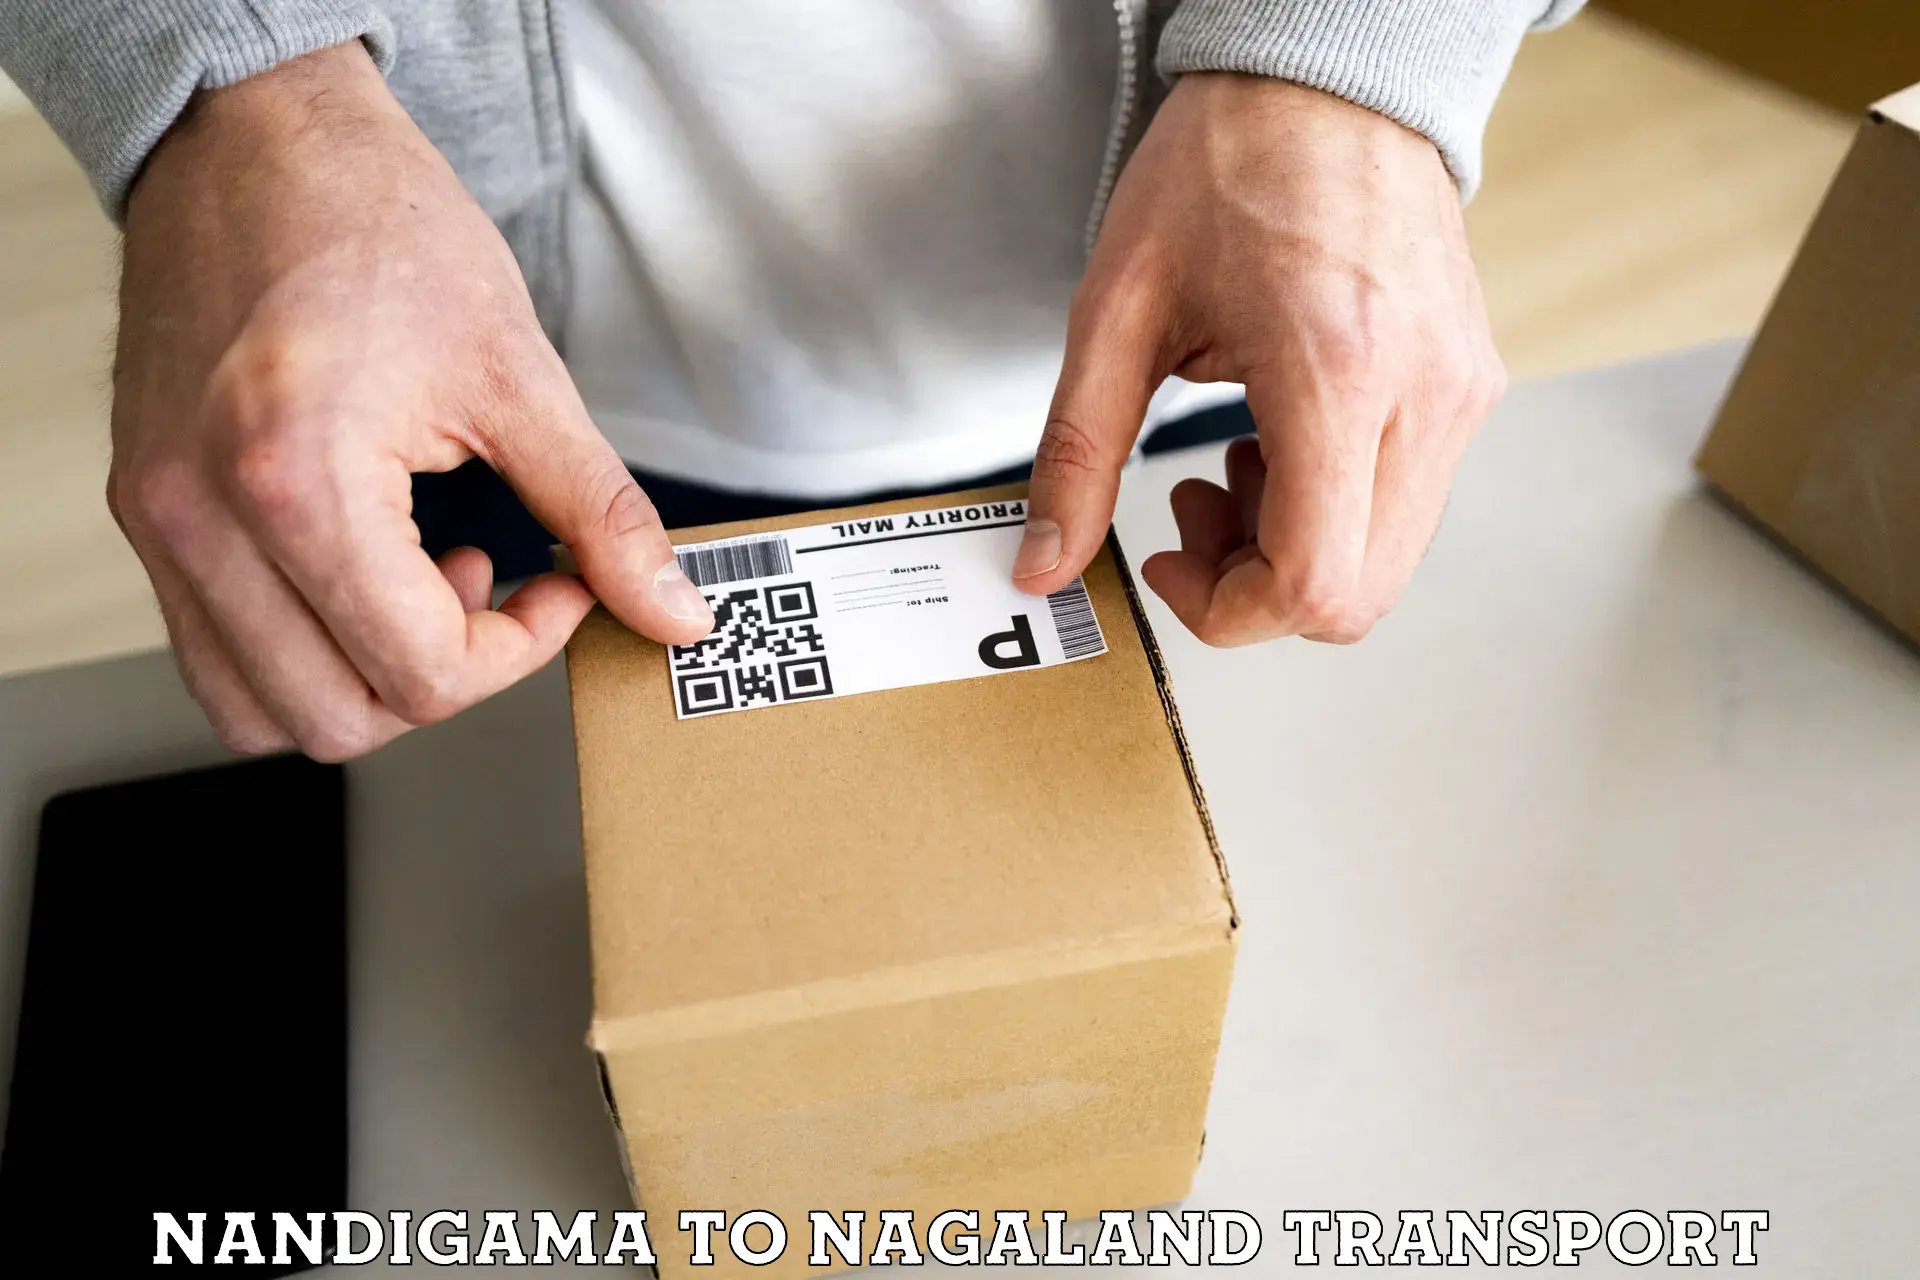 Container transport service Nandigama to Nagaland